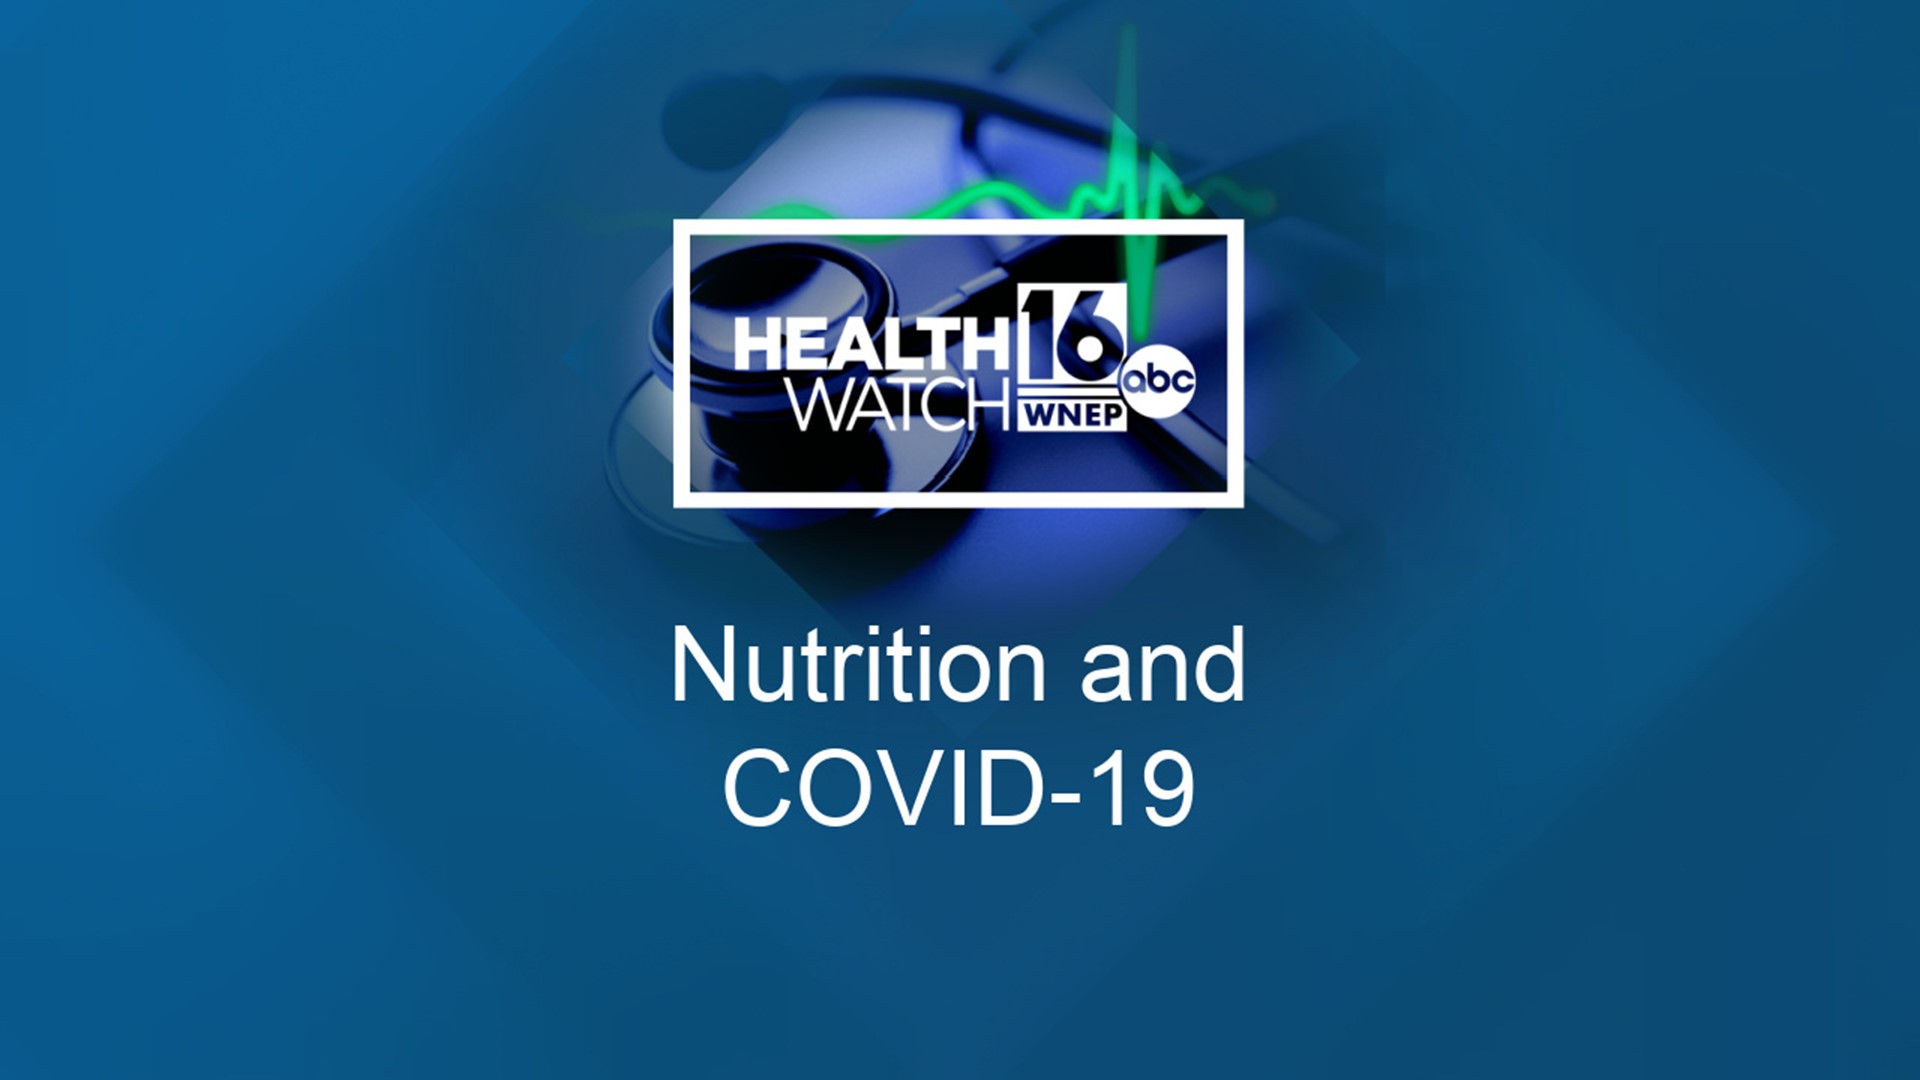 No food or diet plan will cure COVID-19 or prevent you from getting it, but nutritionists say there is a strong link between good nutrition and immunity.